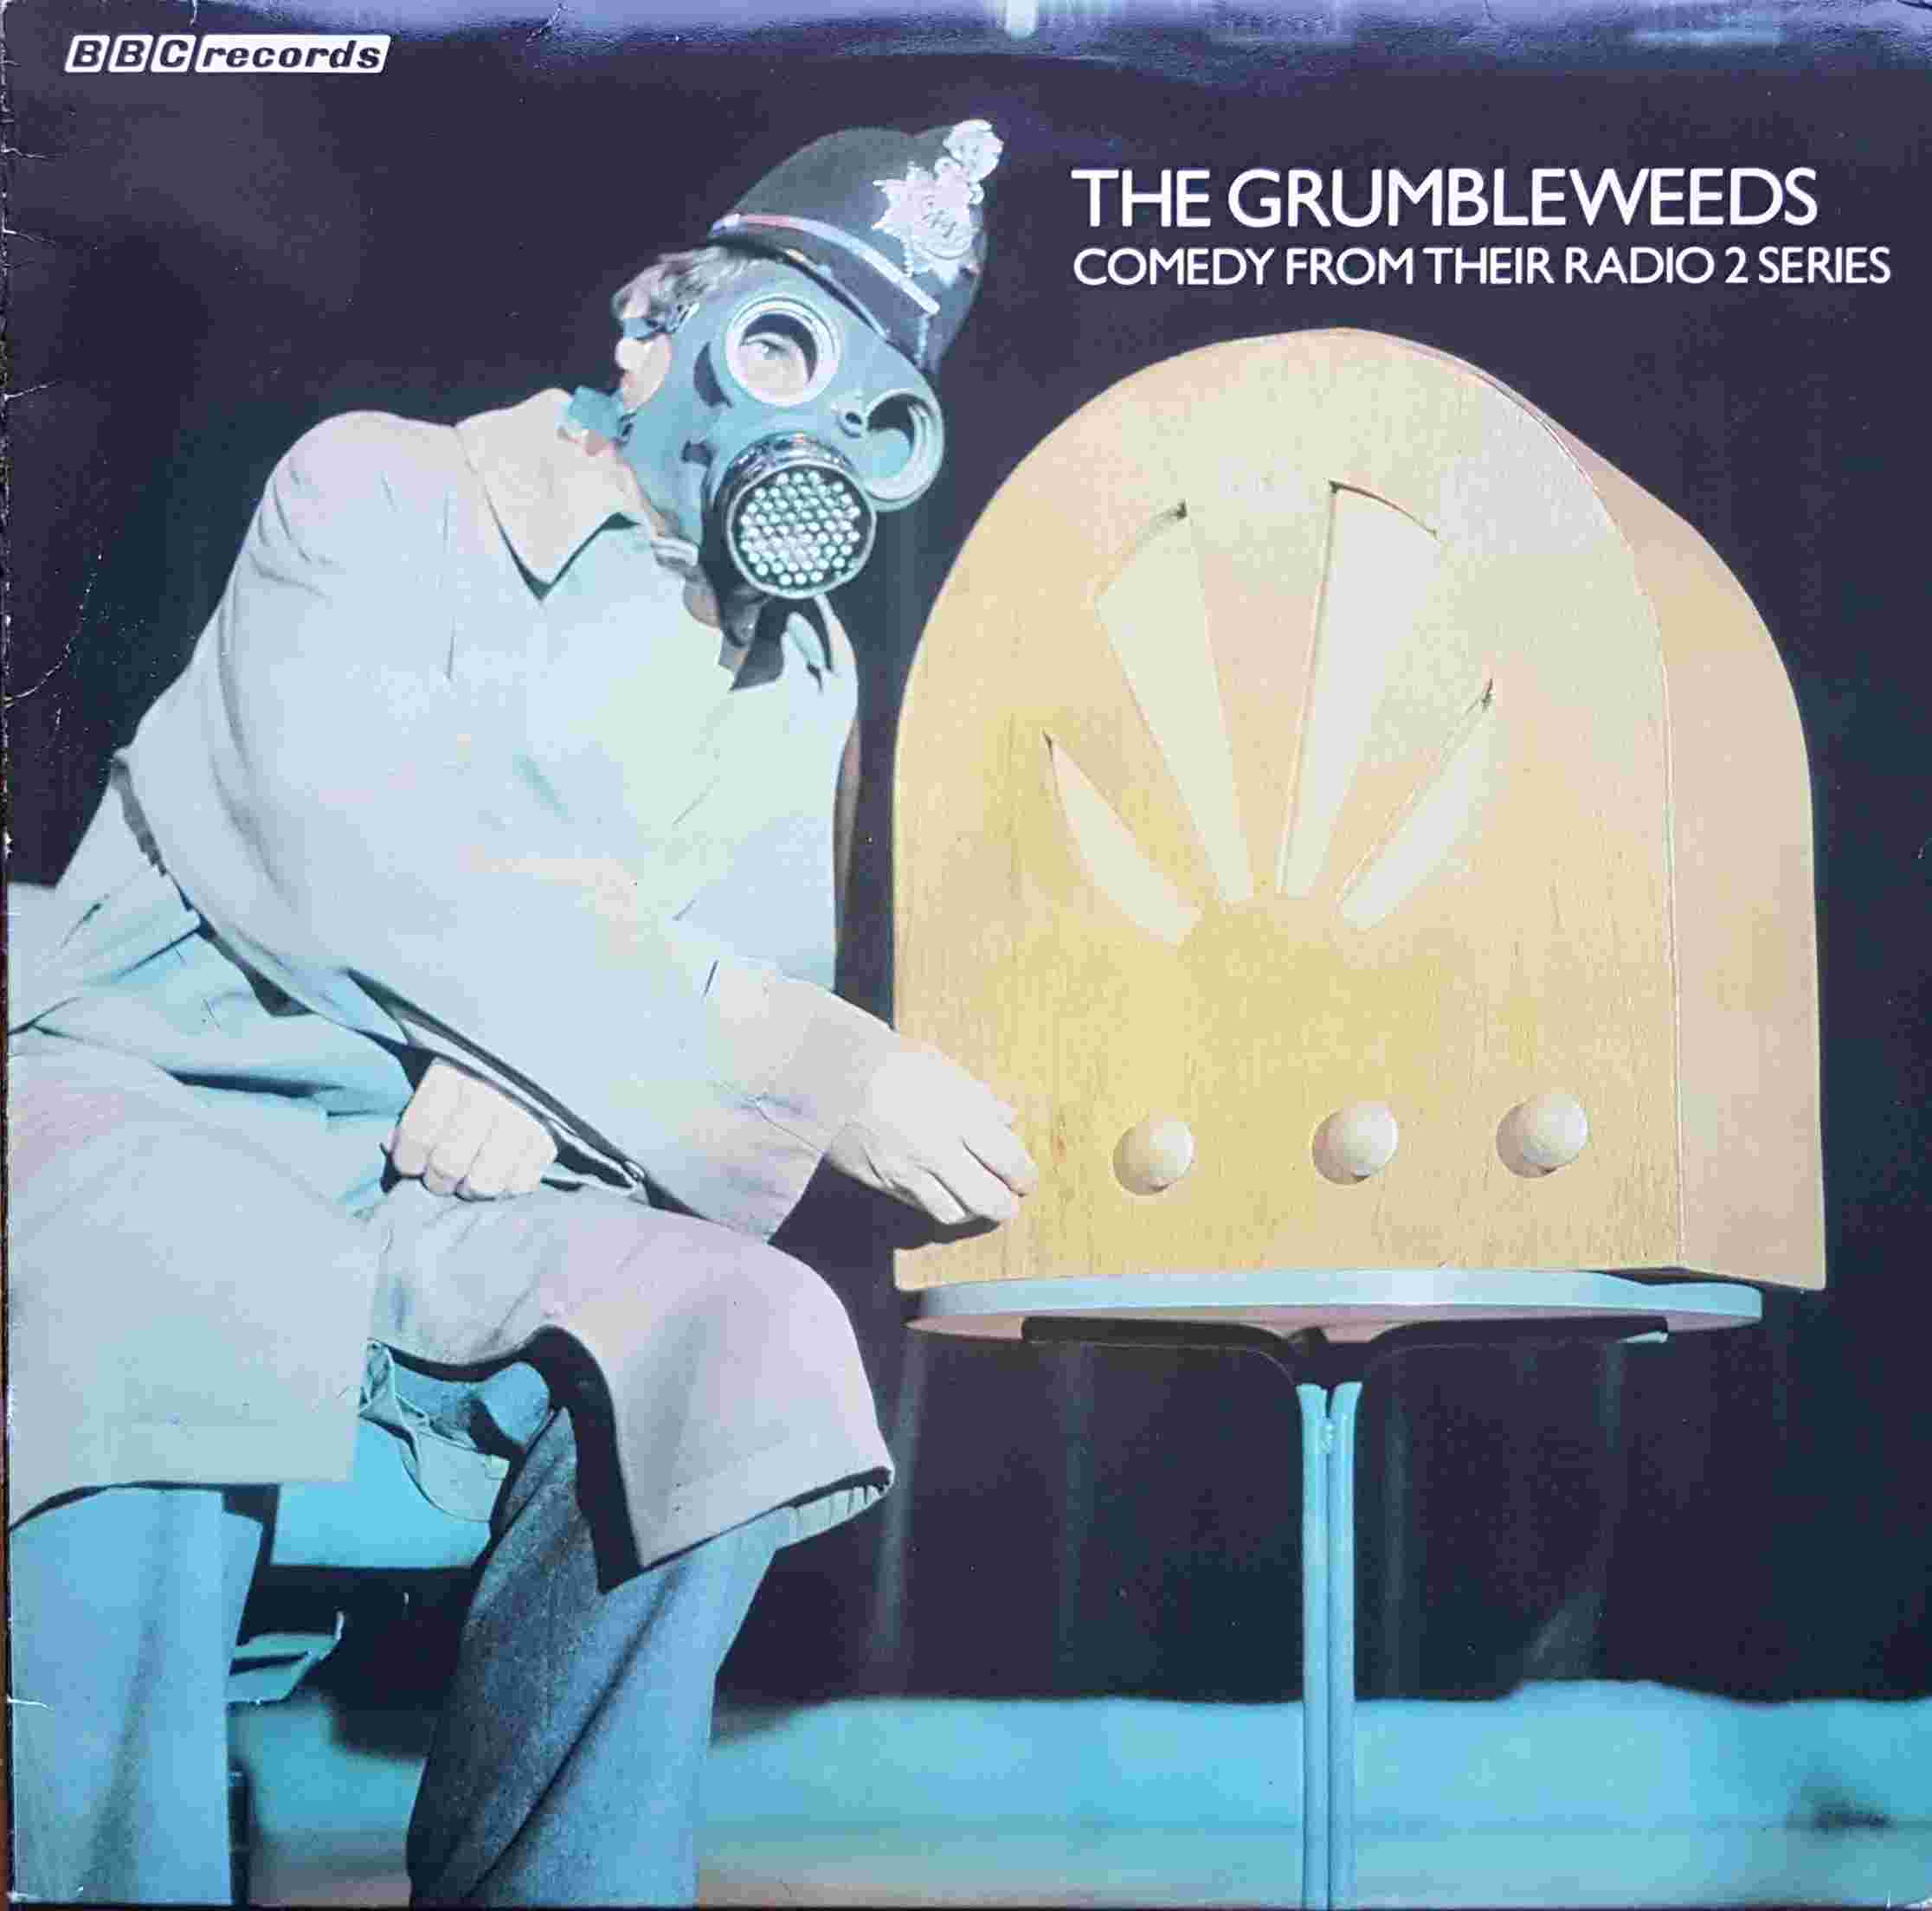 Picture of REH 372 The Grumbleweeds by artist Mike Craig / Ron McDonnell from the BBC albums - Records and Tapes library